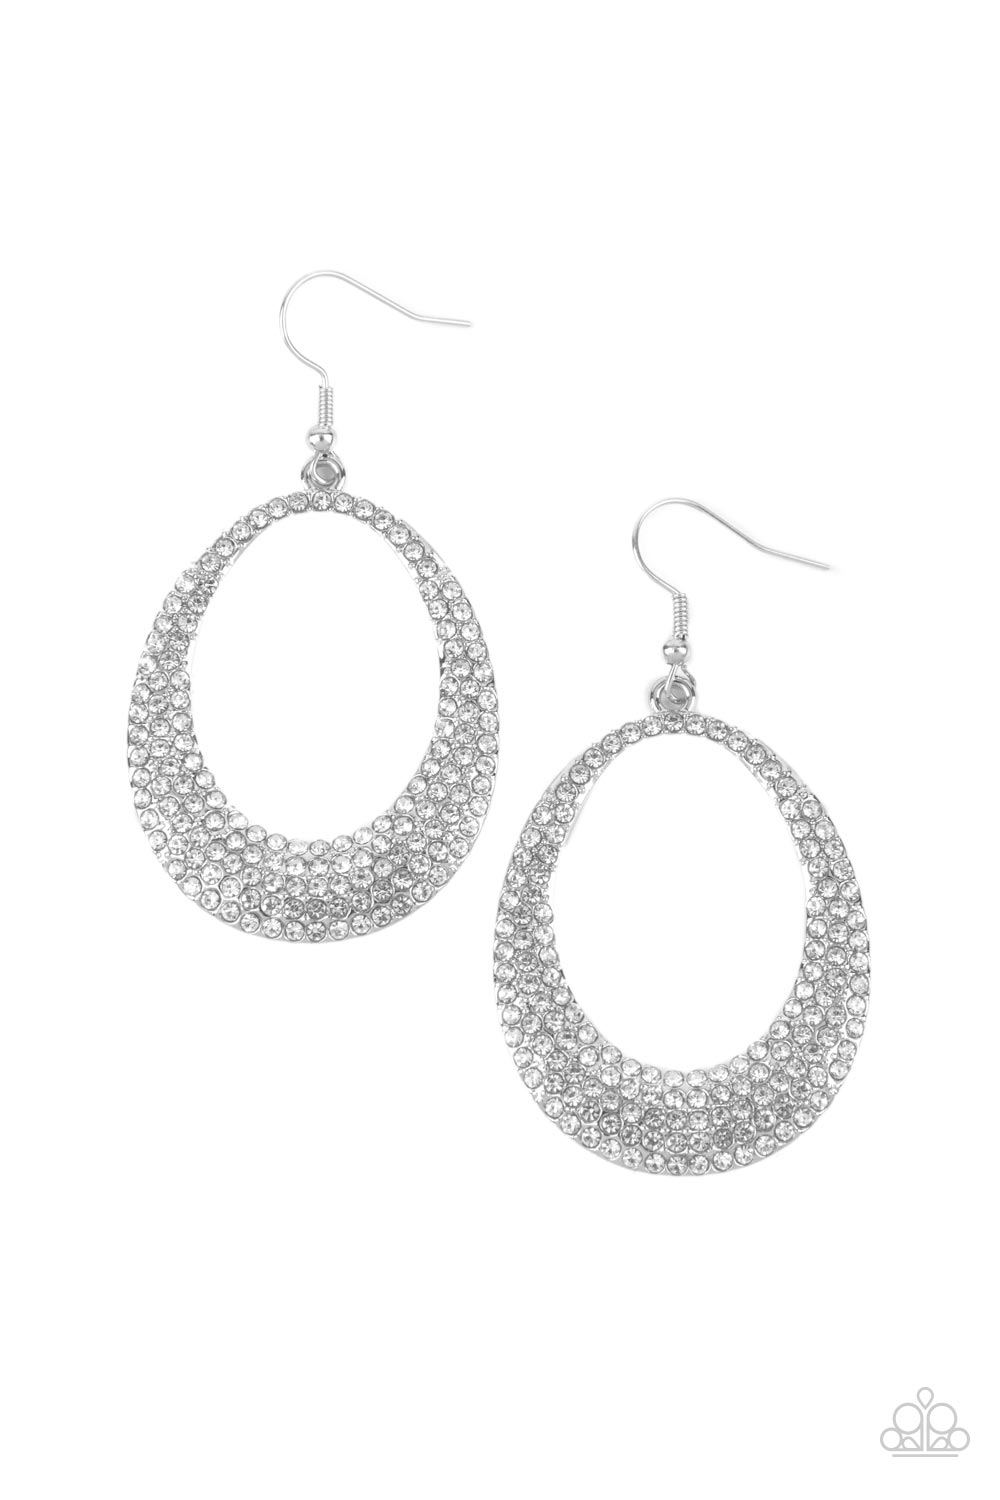 Storybook Bride Paparazzi Accessories Earrings - White